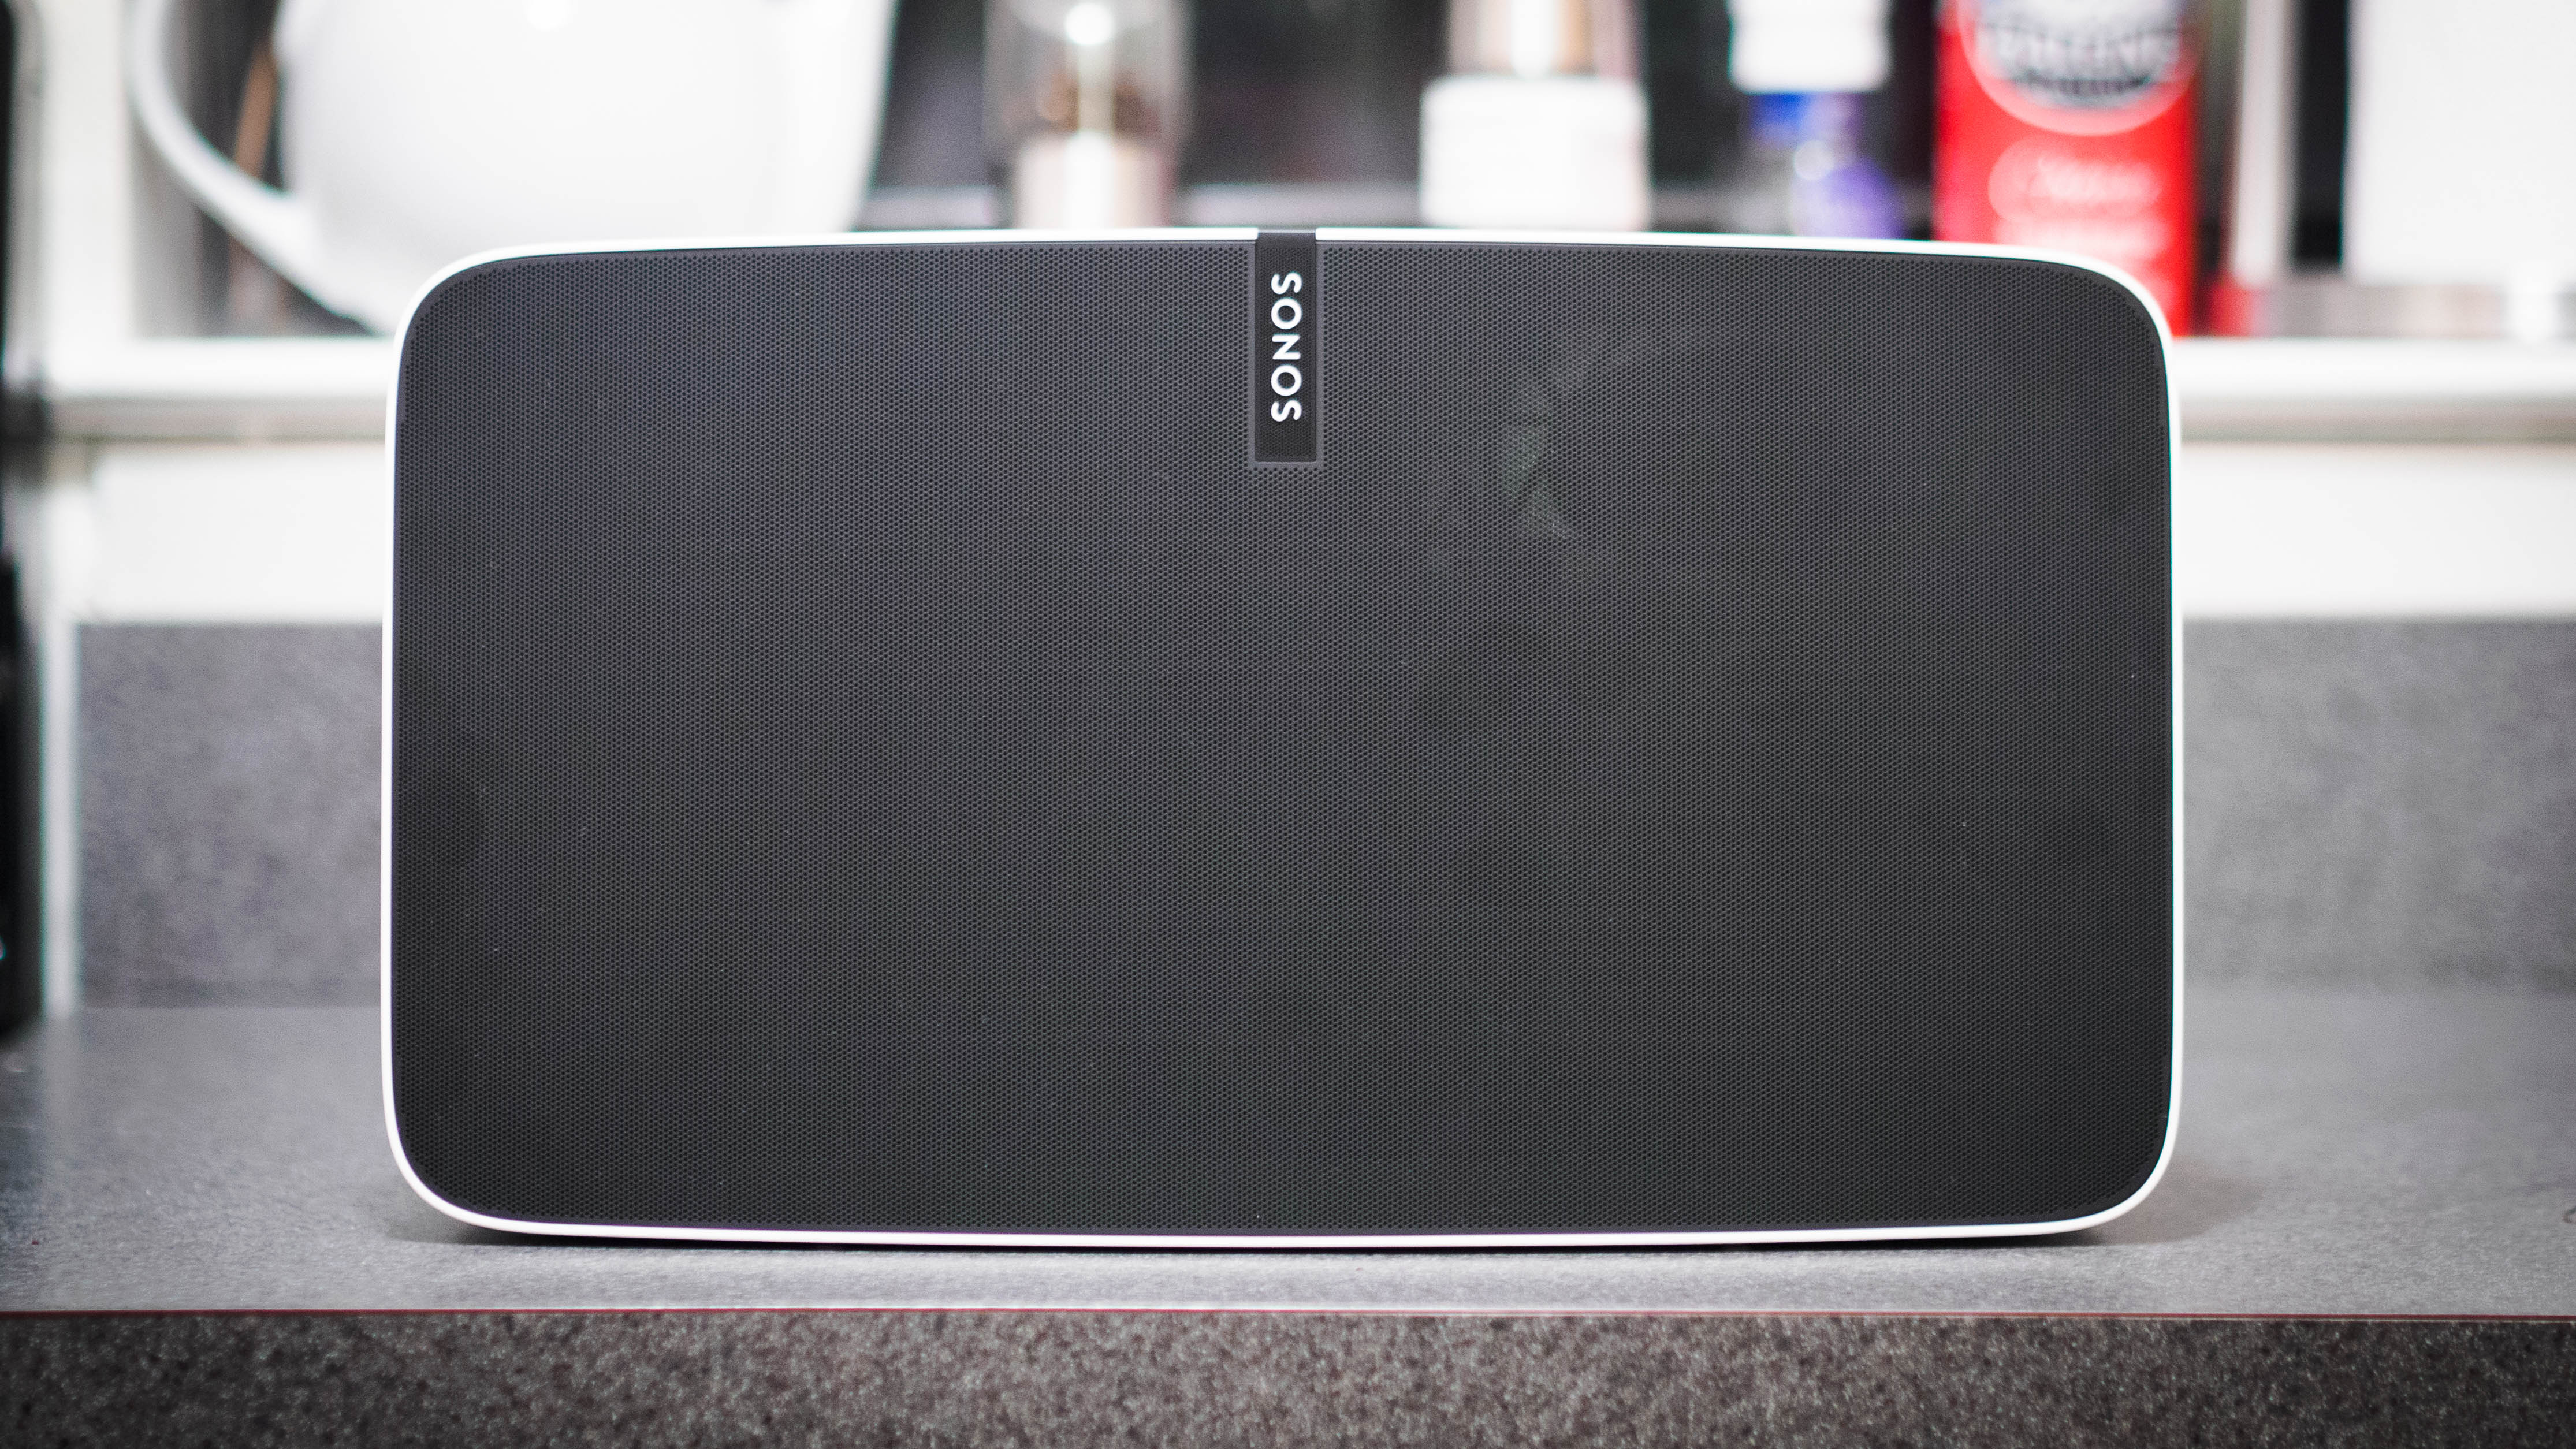 Sonos Play:5 review: Worth the money on audio quality